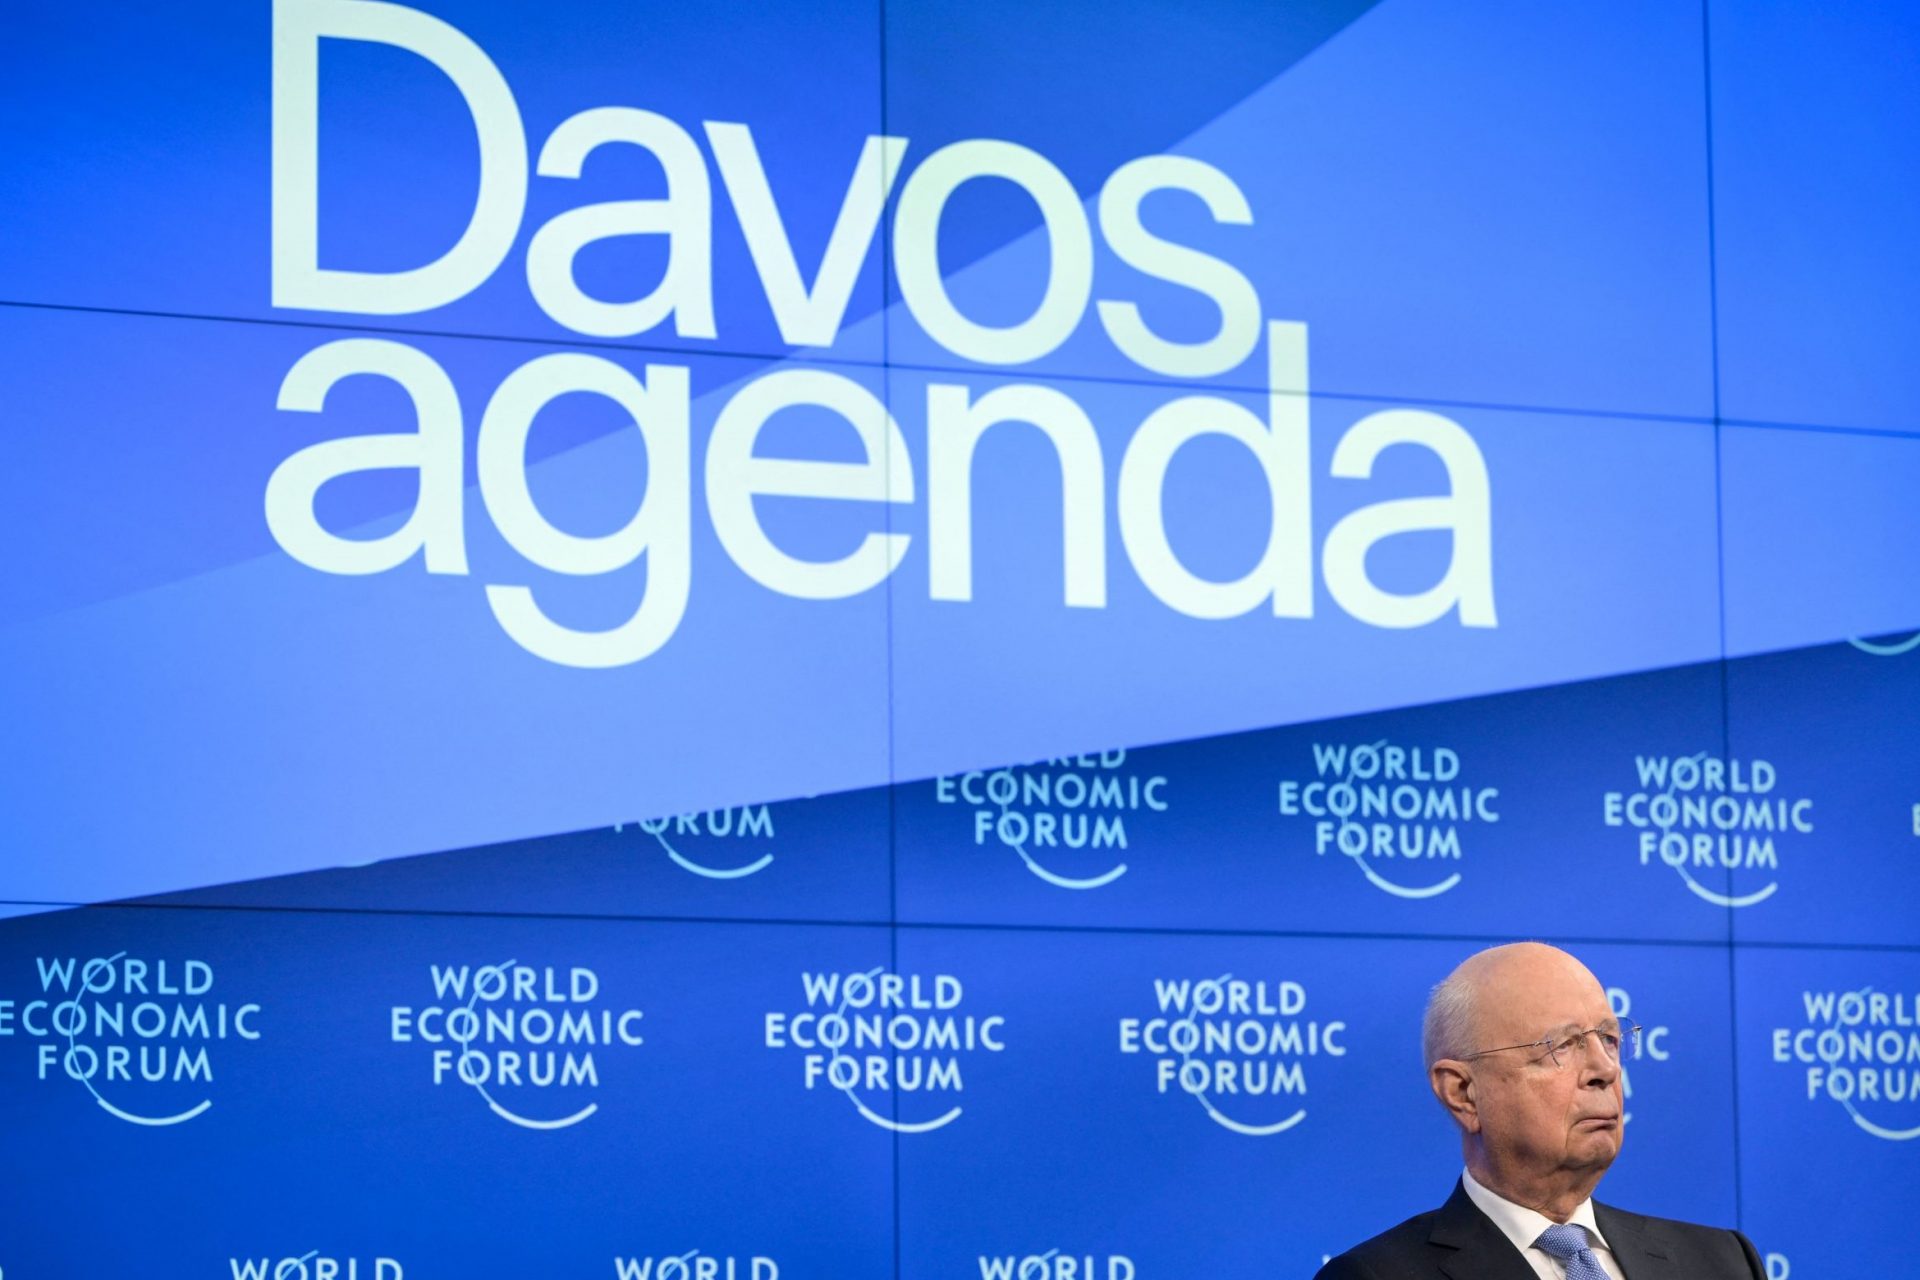 Global elite gather in Davos to talk about 'rebuilding trust'